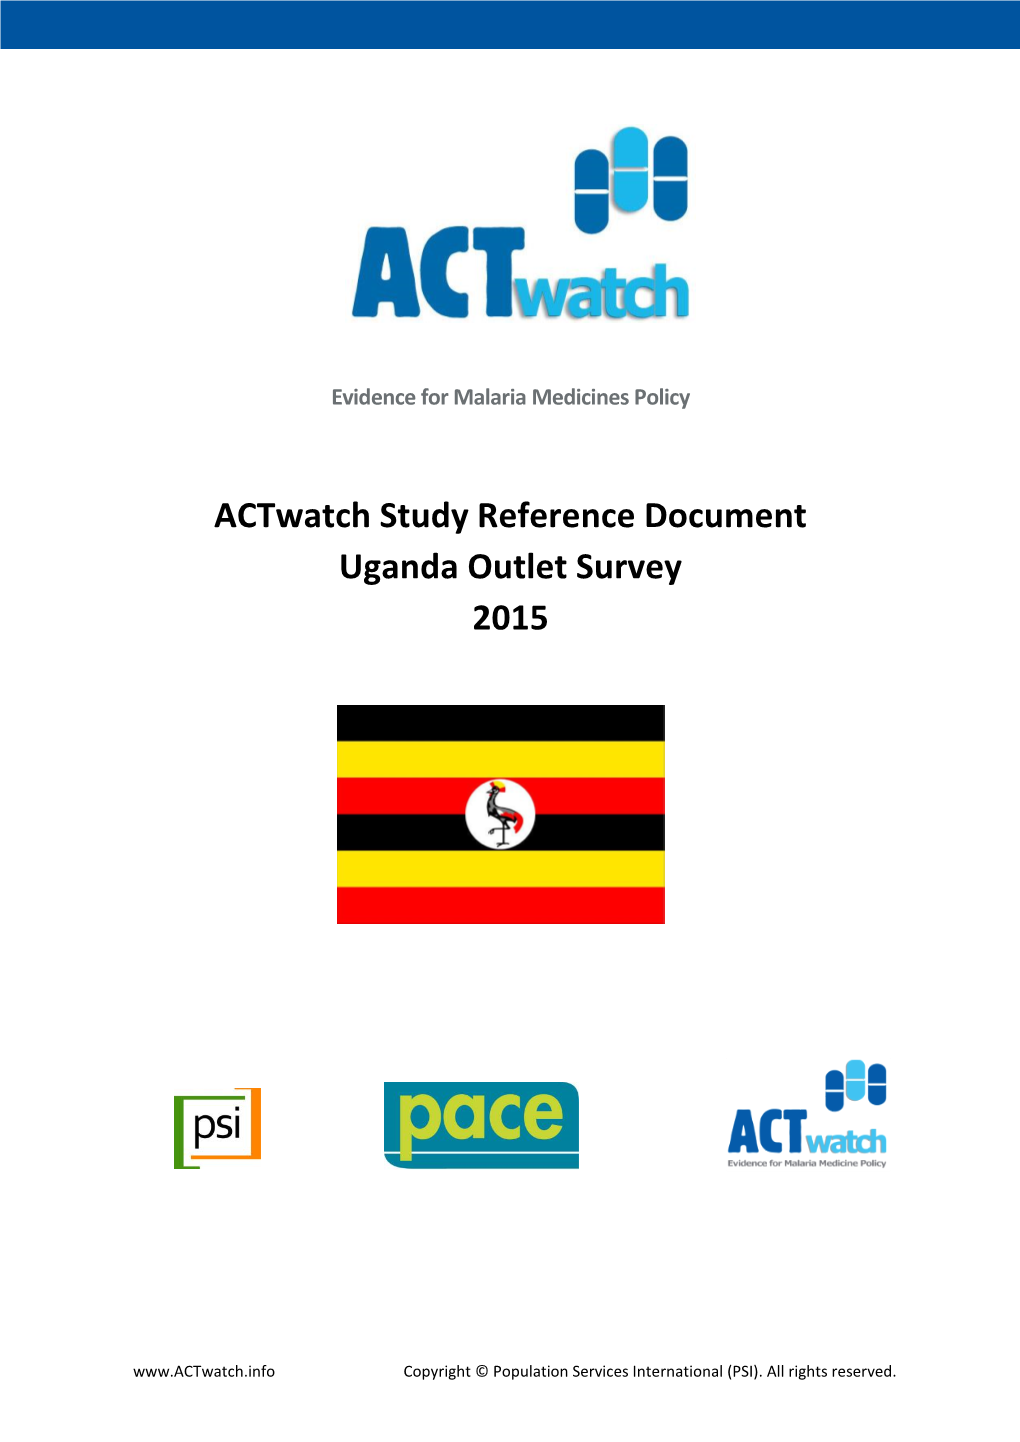 Actwatch Study Reference Document Uganda Outlet Survey 2015